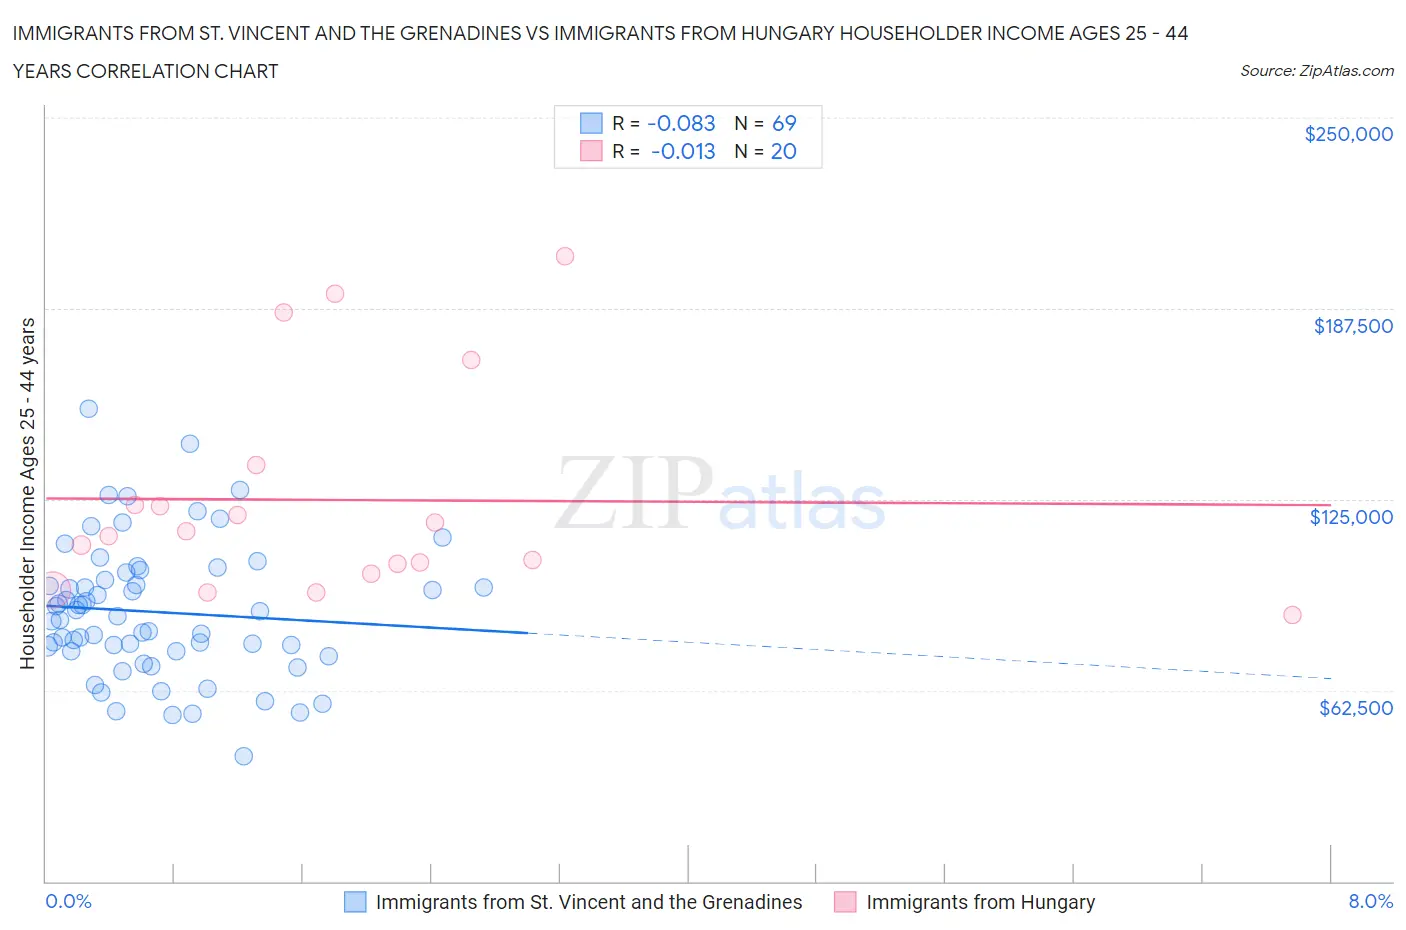 Immigrants from St. Vincent and the Grenadines vs Immigrants from Hungary Householder Income Ages 25 - 44 years